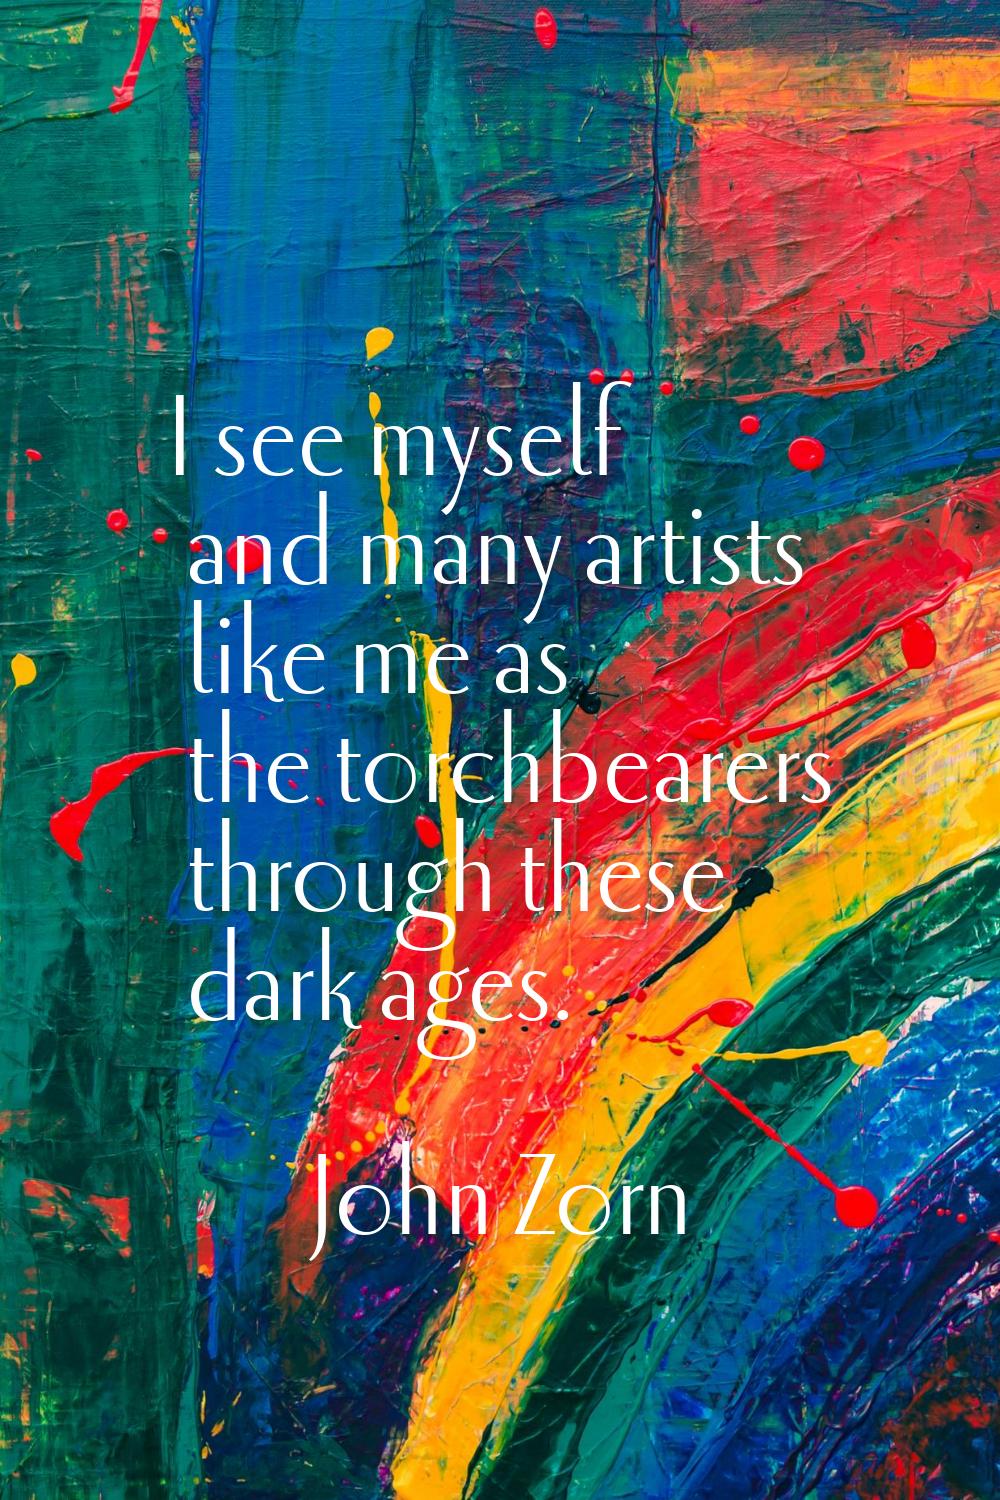 I see myself and many artists like me as the torchbearers through these dark ages.